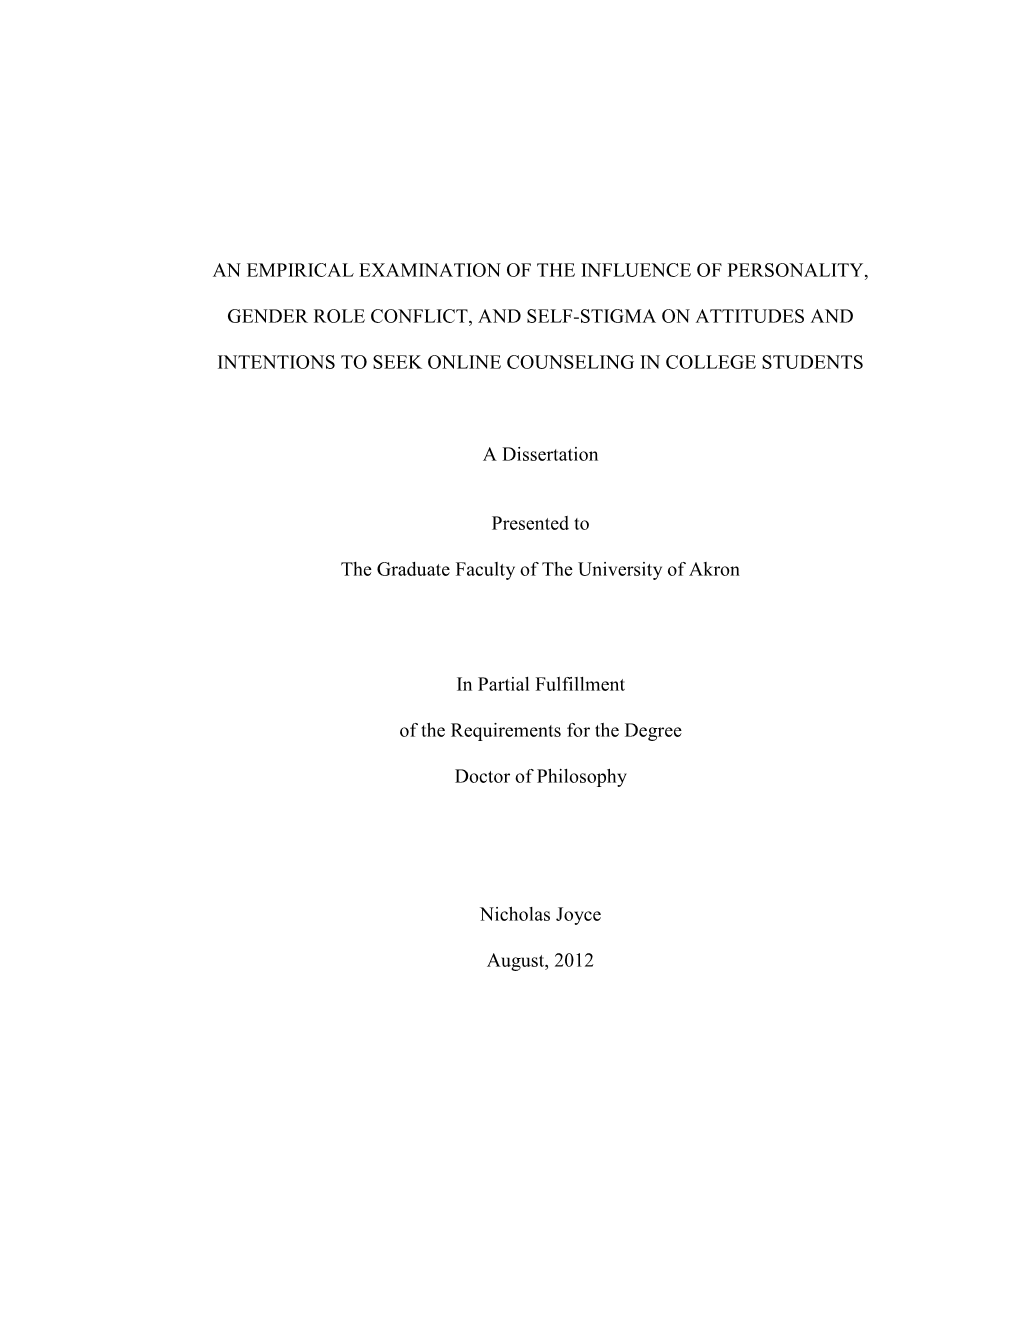 An Empirical Examination of the Influence of Personality